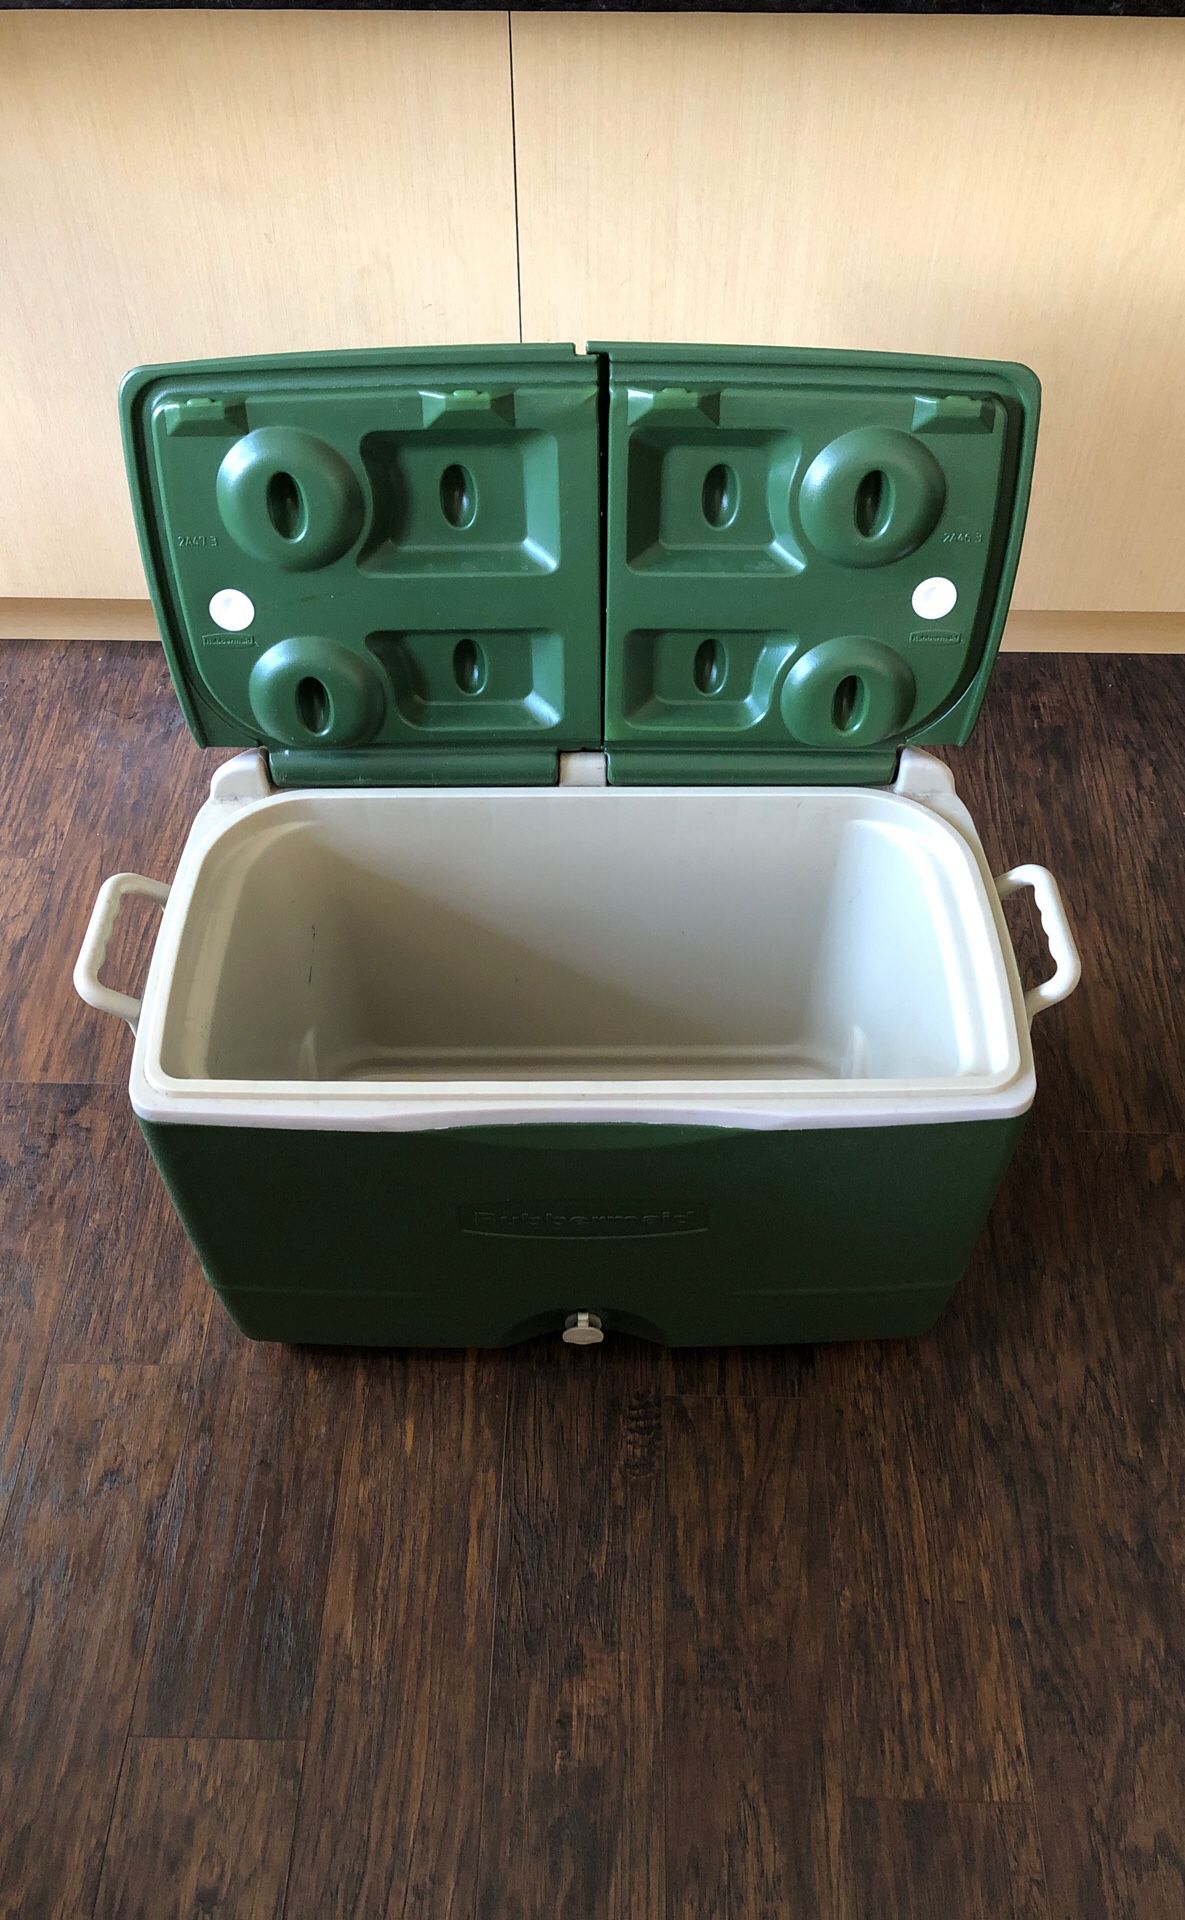 Rubbermaid Wheeled Cooler